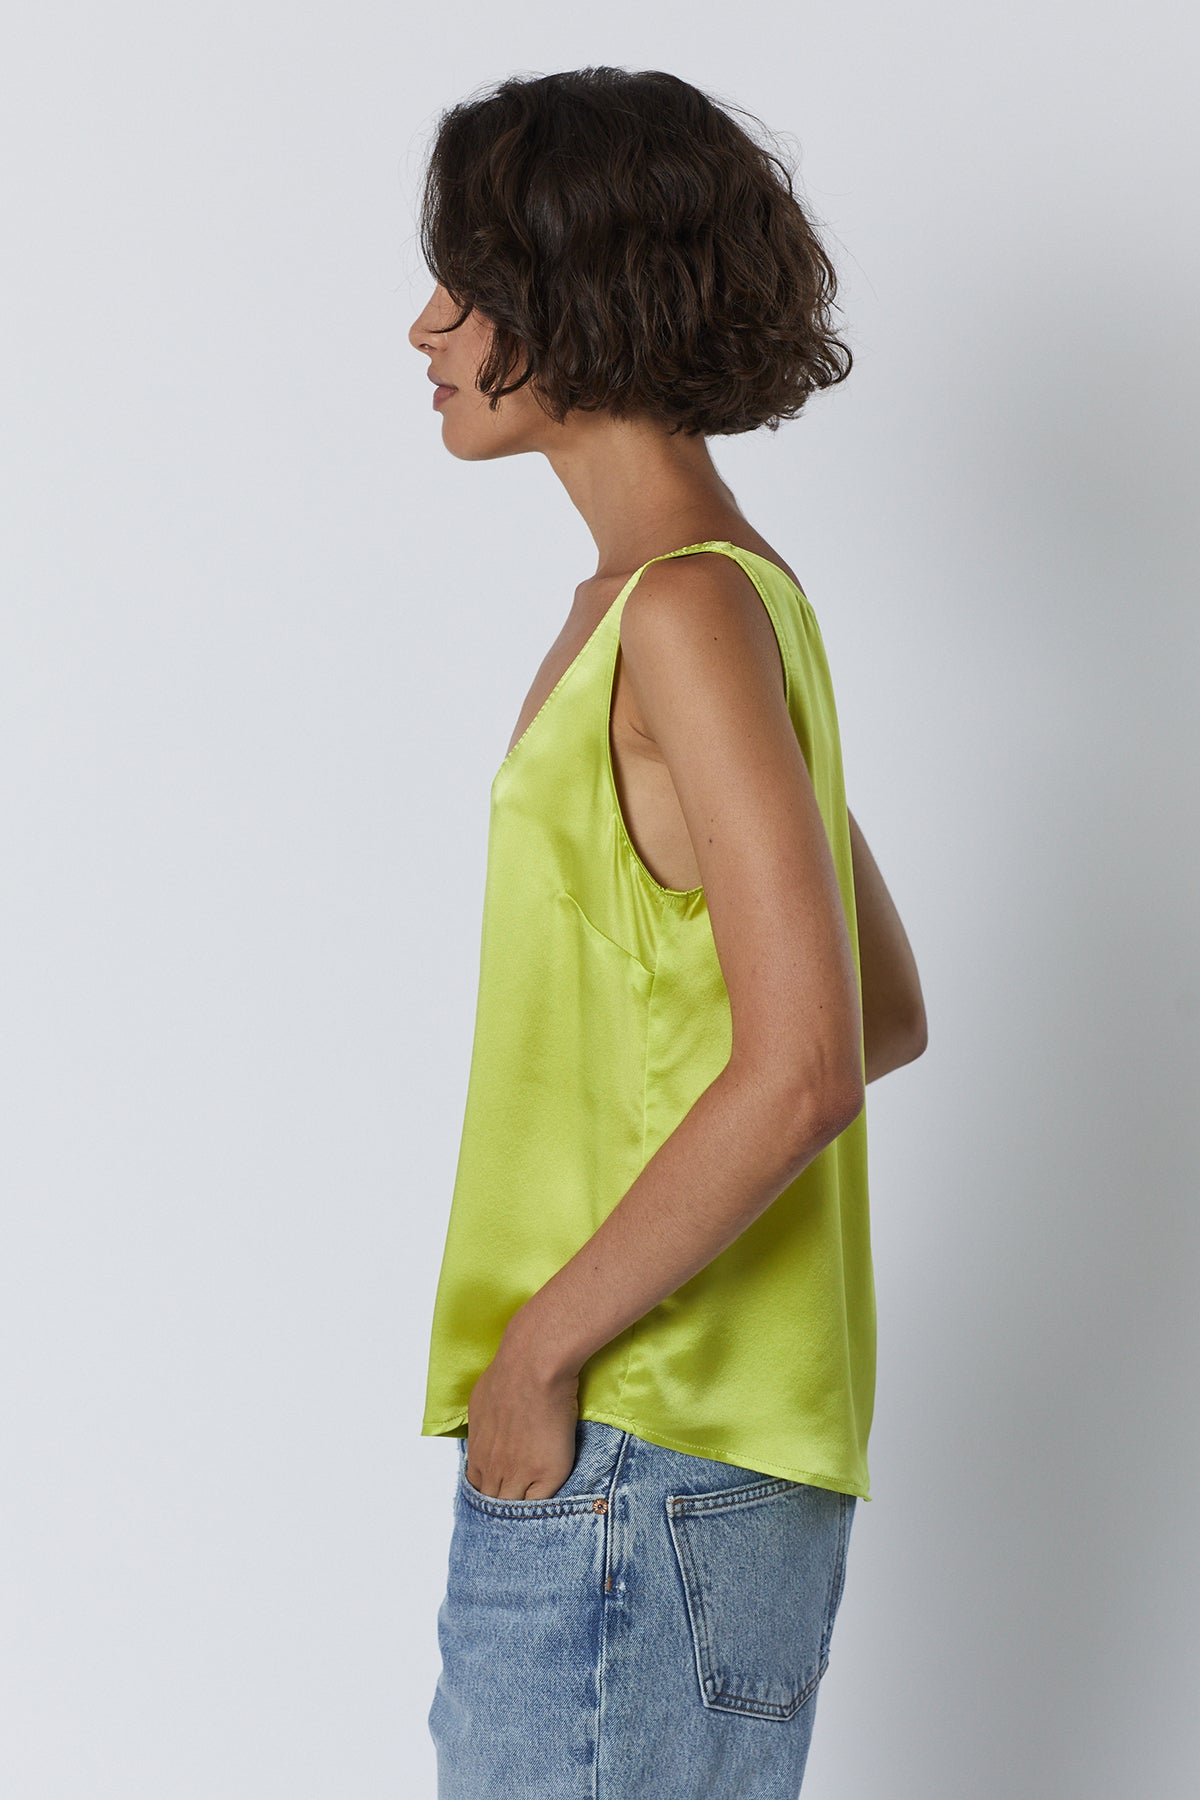   Nolita Tank Top in lime green with blue denim side 